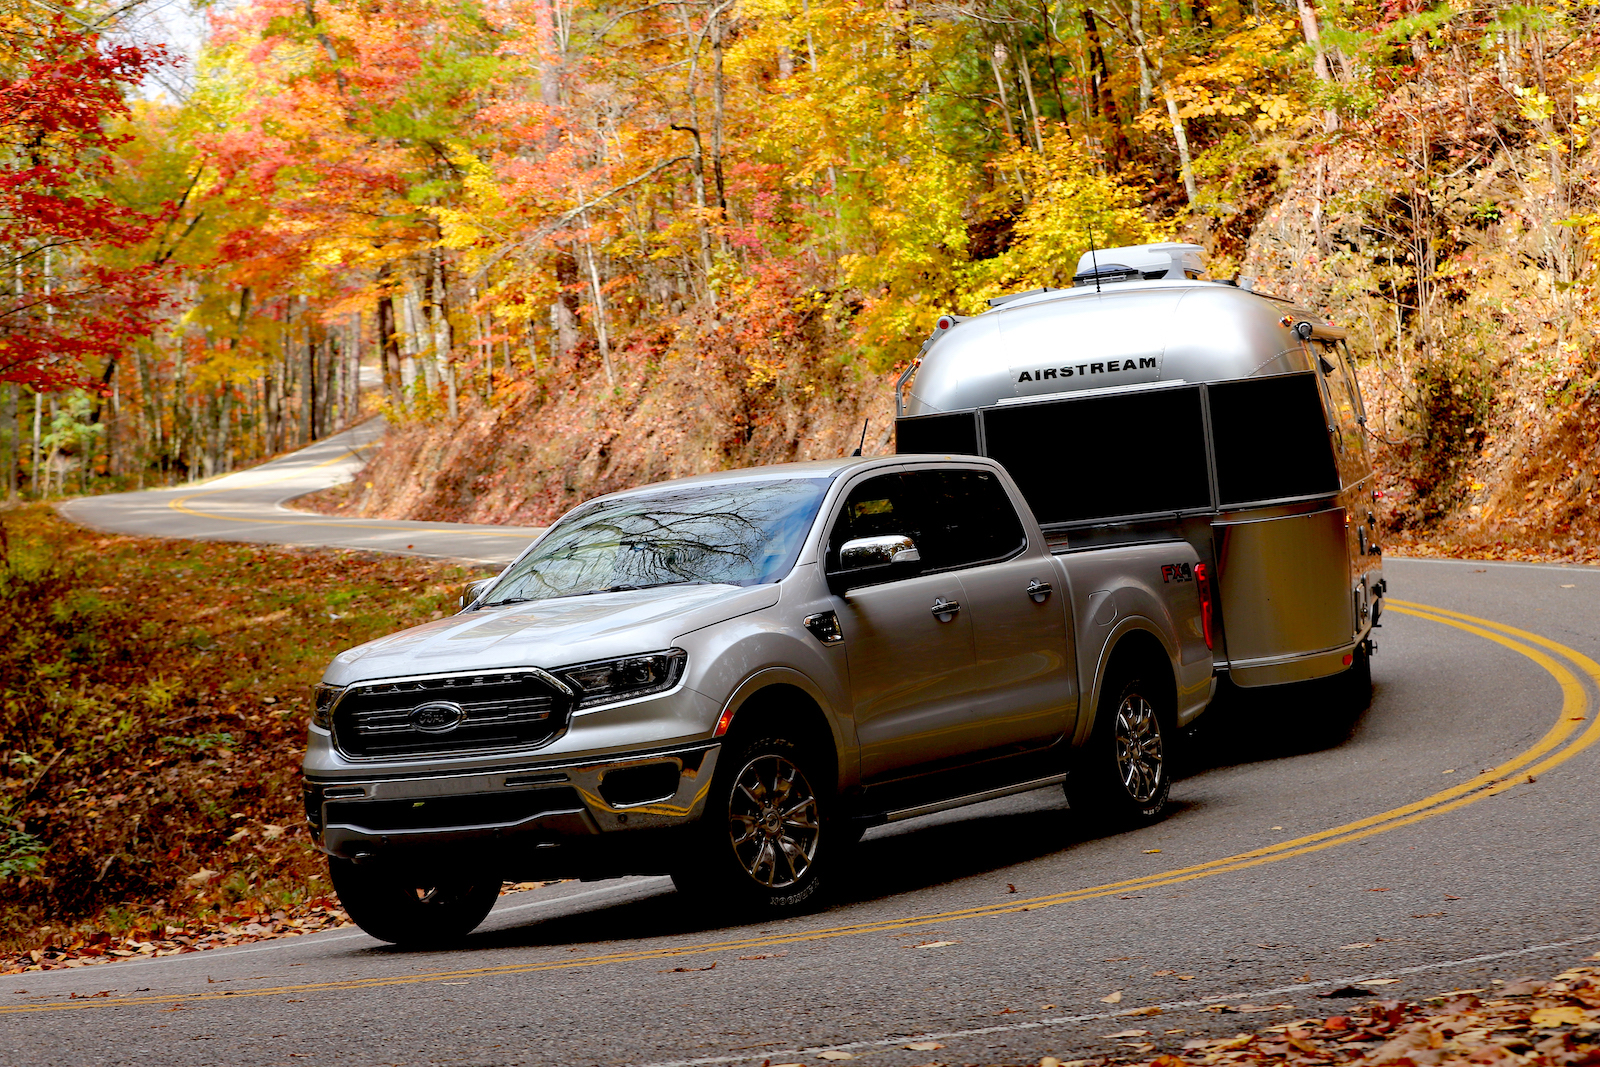 Ford Ranger Nice Fall Truck Trailer Combo Picture airstream-fron-view-2-tail-of-the-dragon-1600x900-